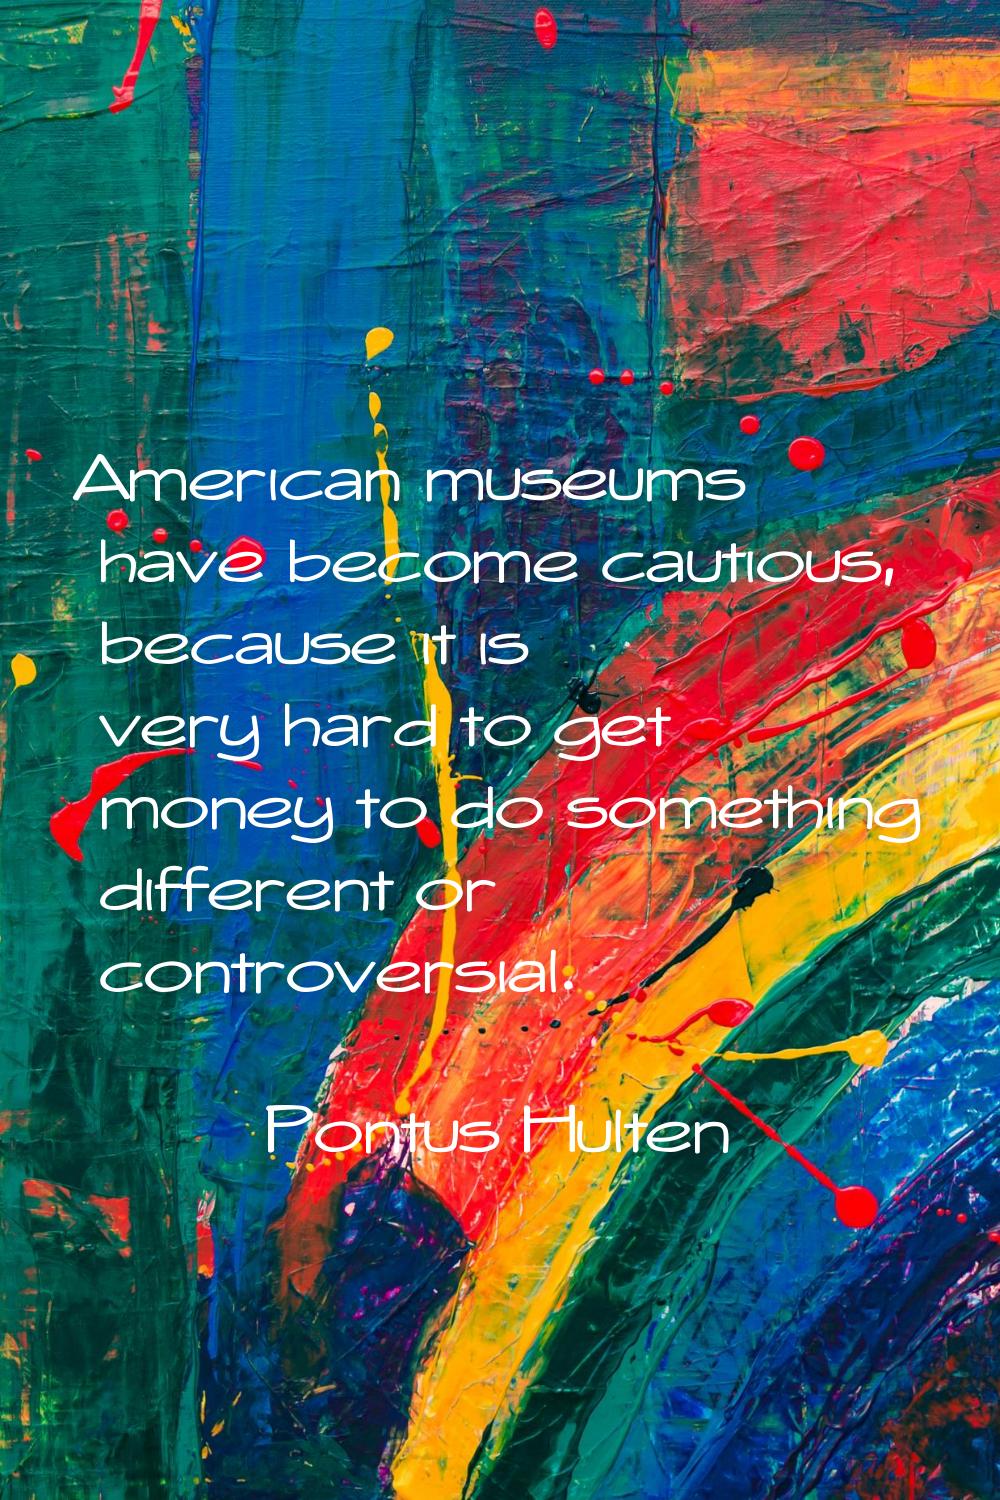 American museums have become cautious, because it is very hard to get money to do something differe